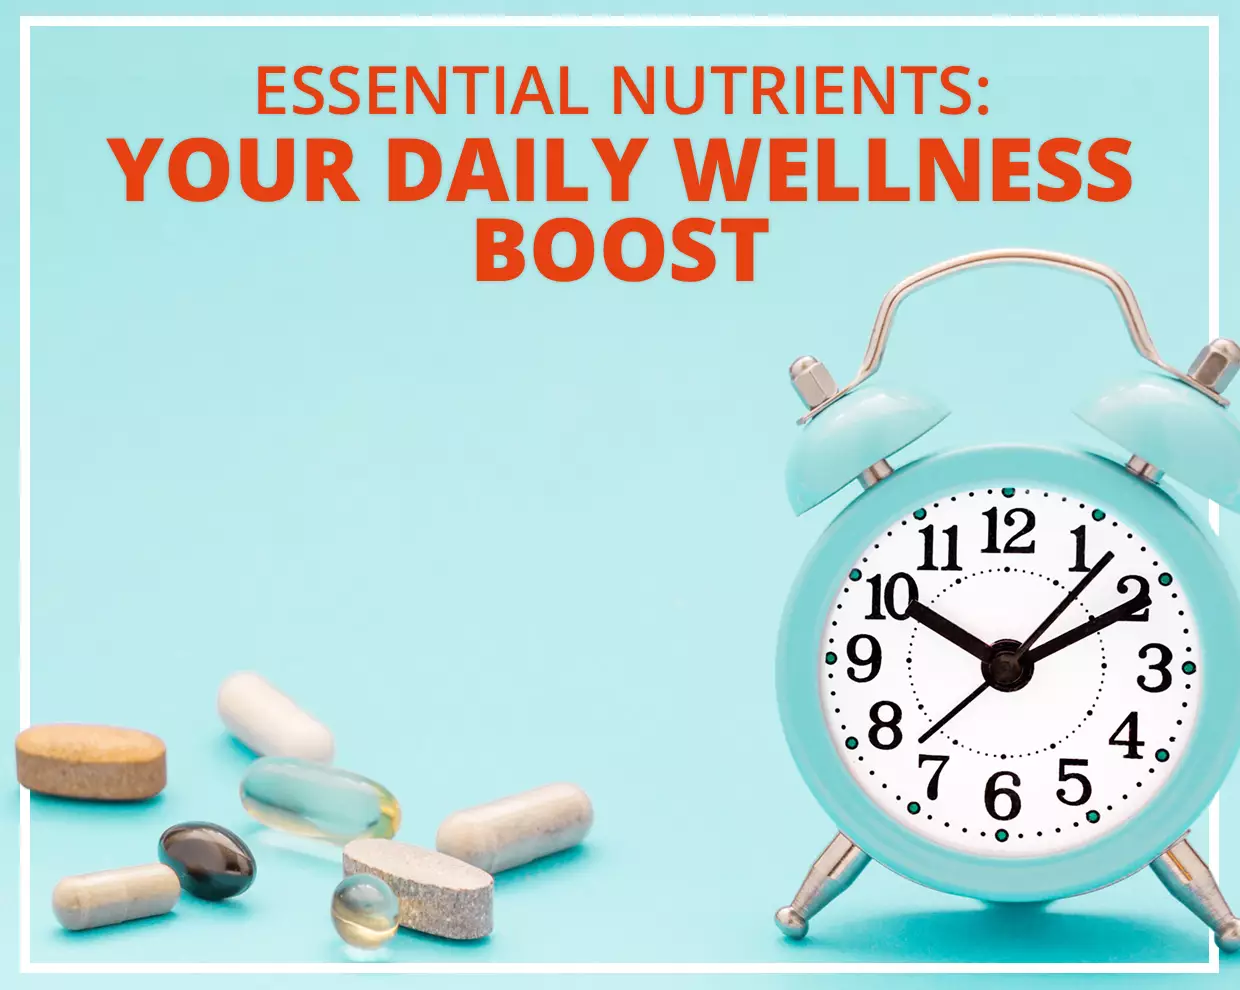 Essential Nutrients: Your Daily Wellness Boost